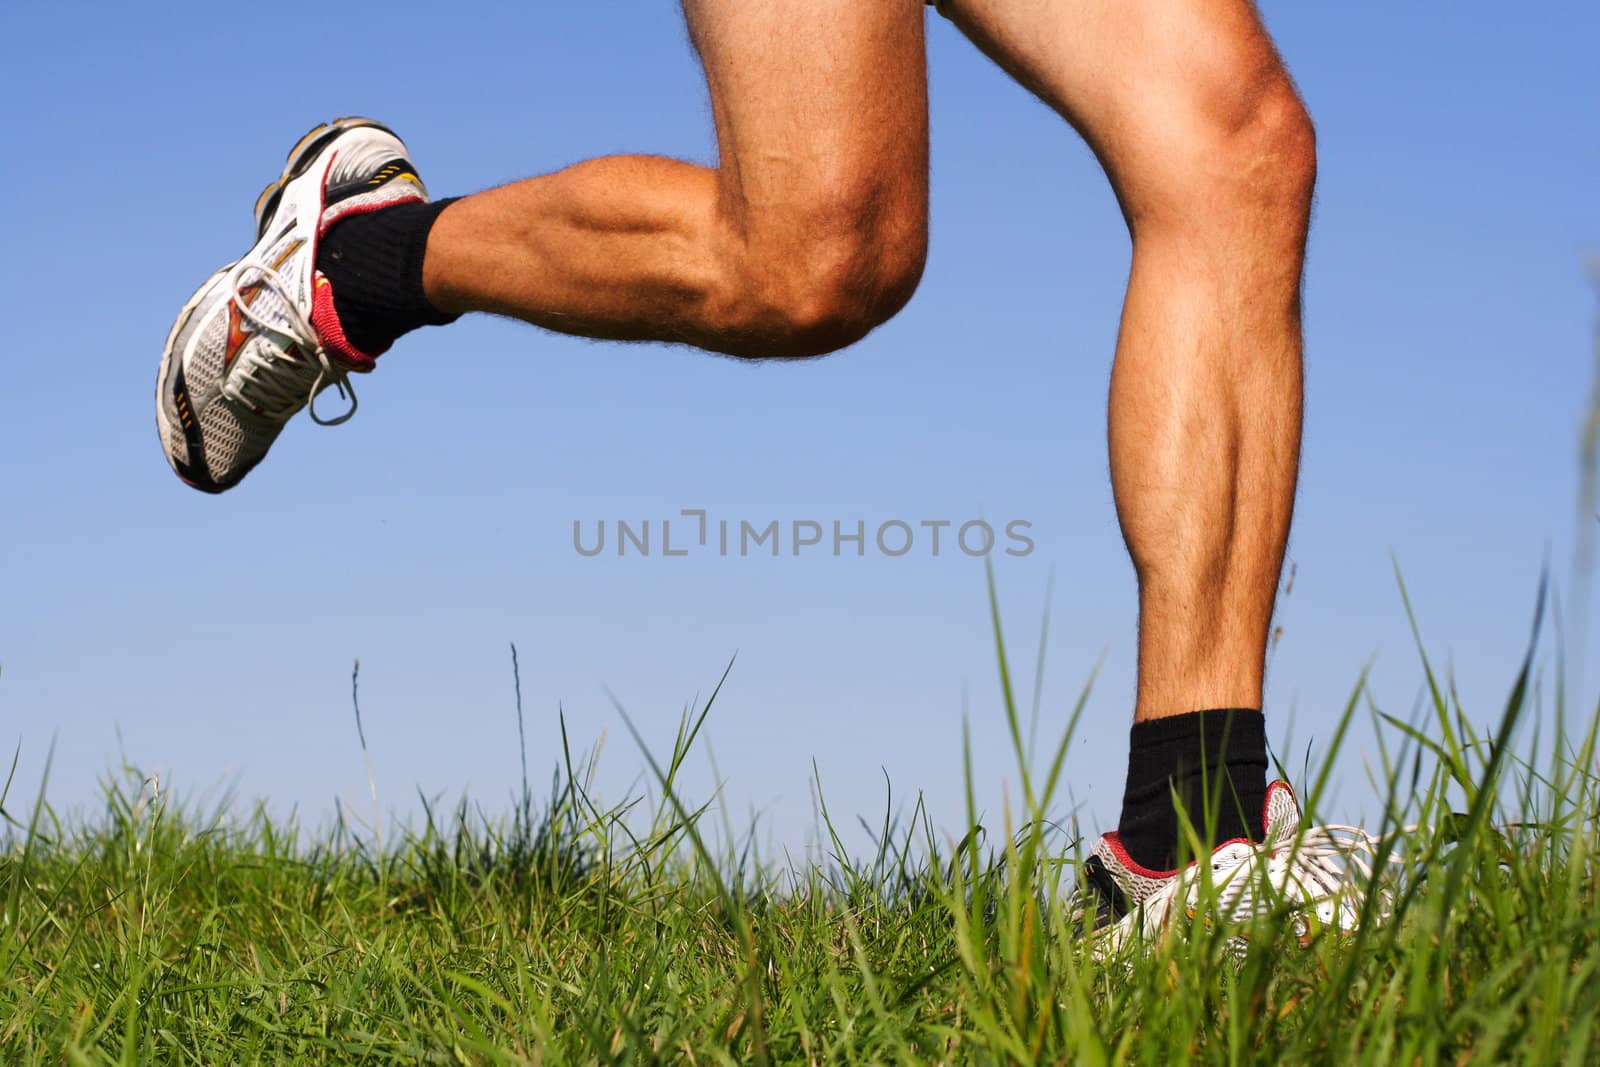 Iconic running image. Freeze action closeup of running shoes and legs in action.